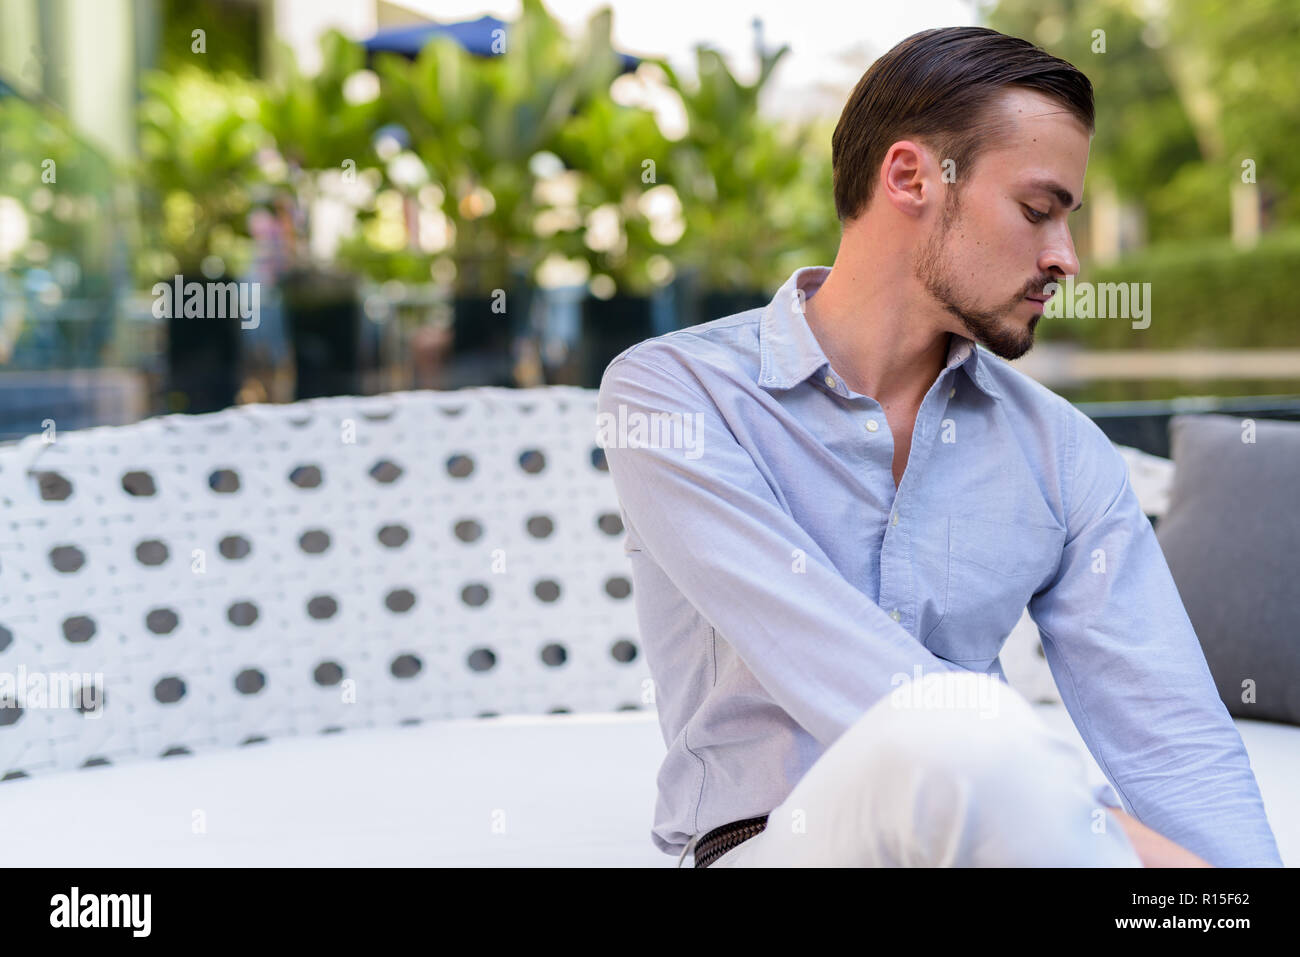 Portrait of young bearded fashionable man sitting outdoors Stock Photo